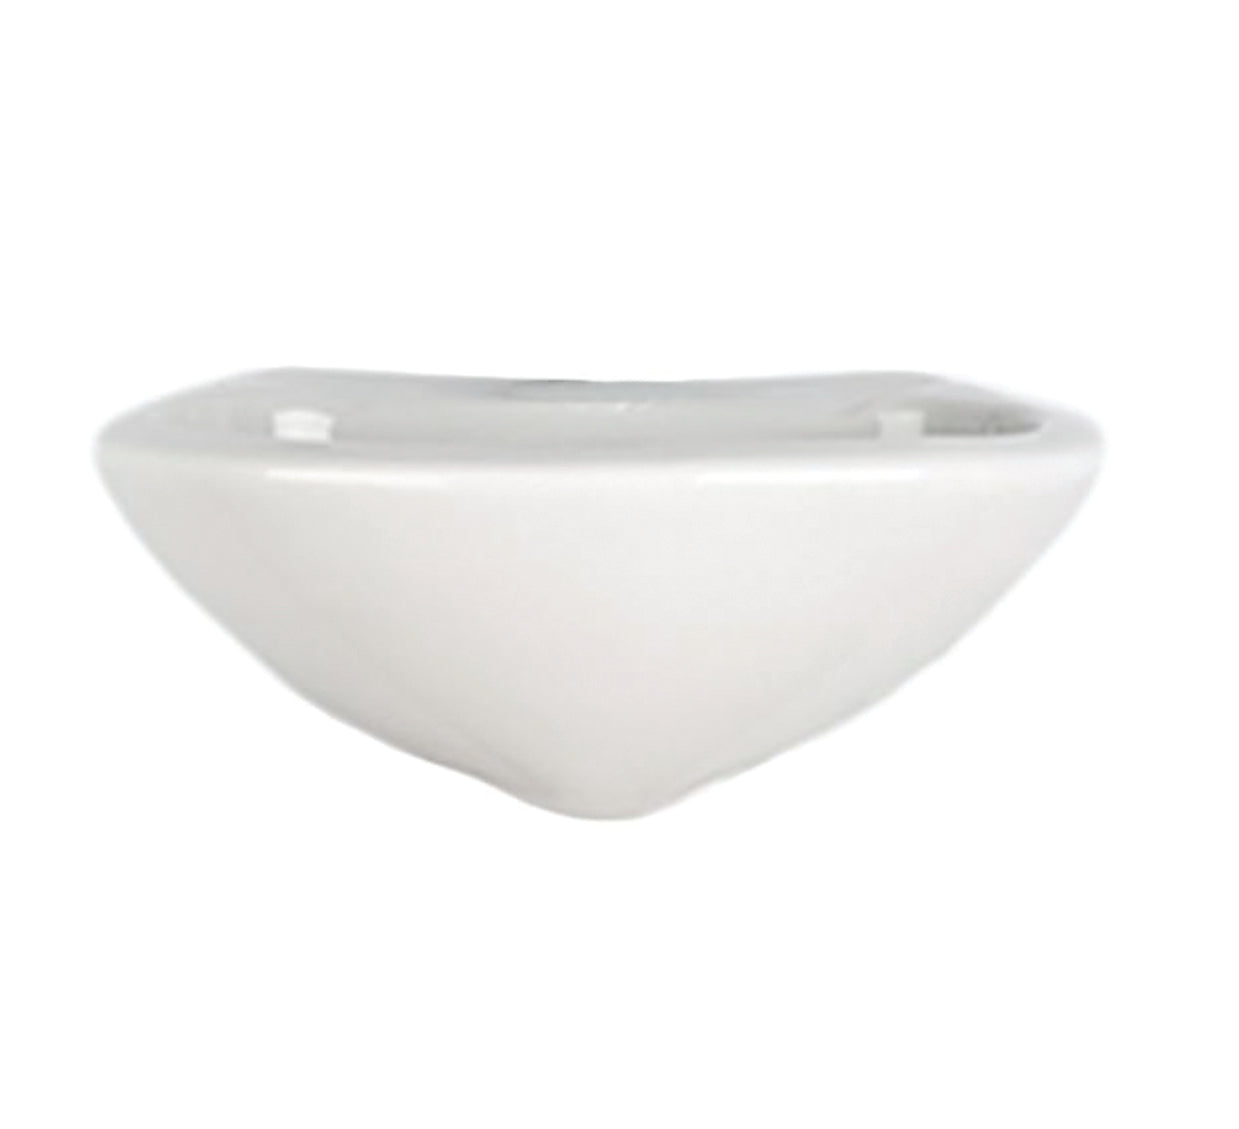 Wall hung round basin white color 19 x 16 1/2 x 7''